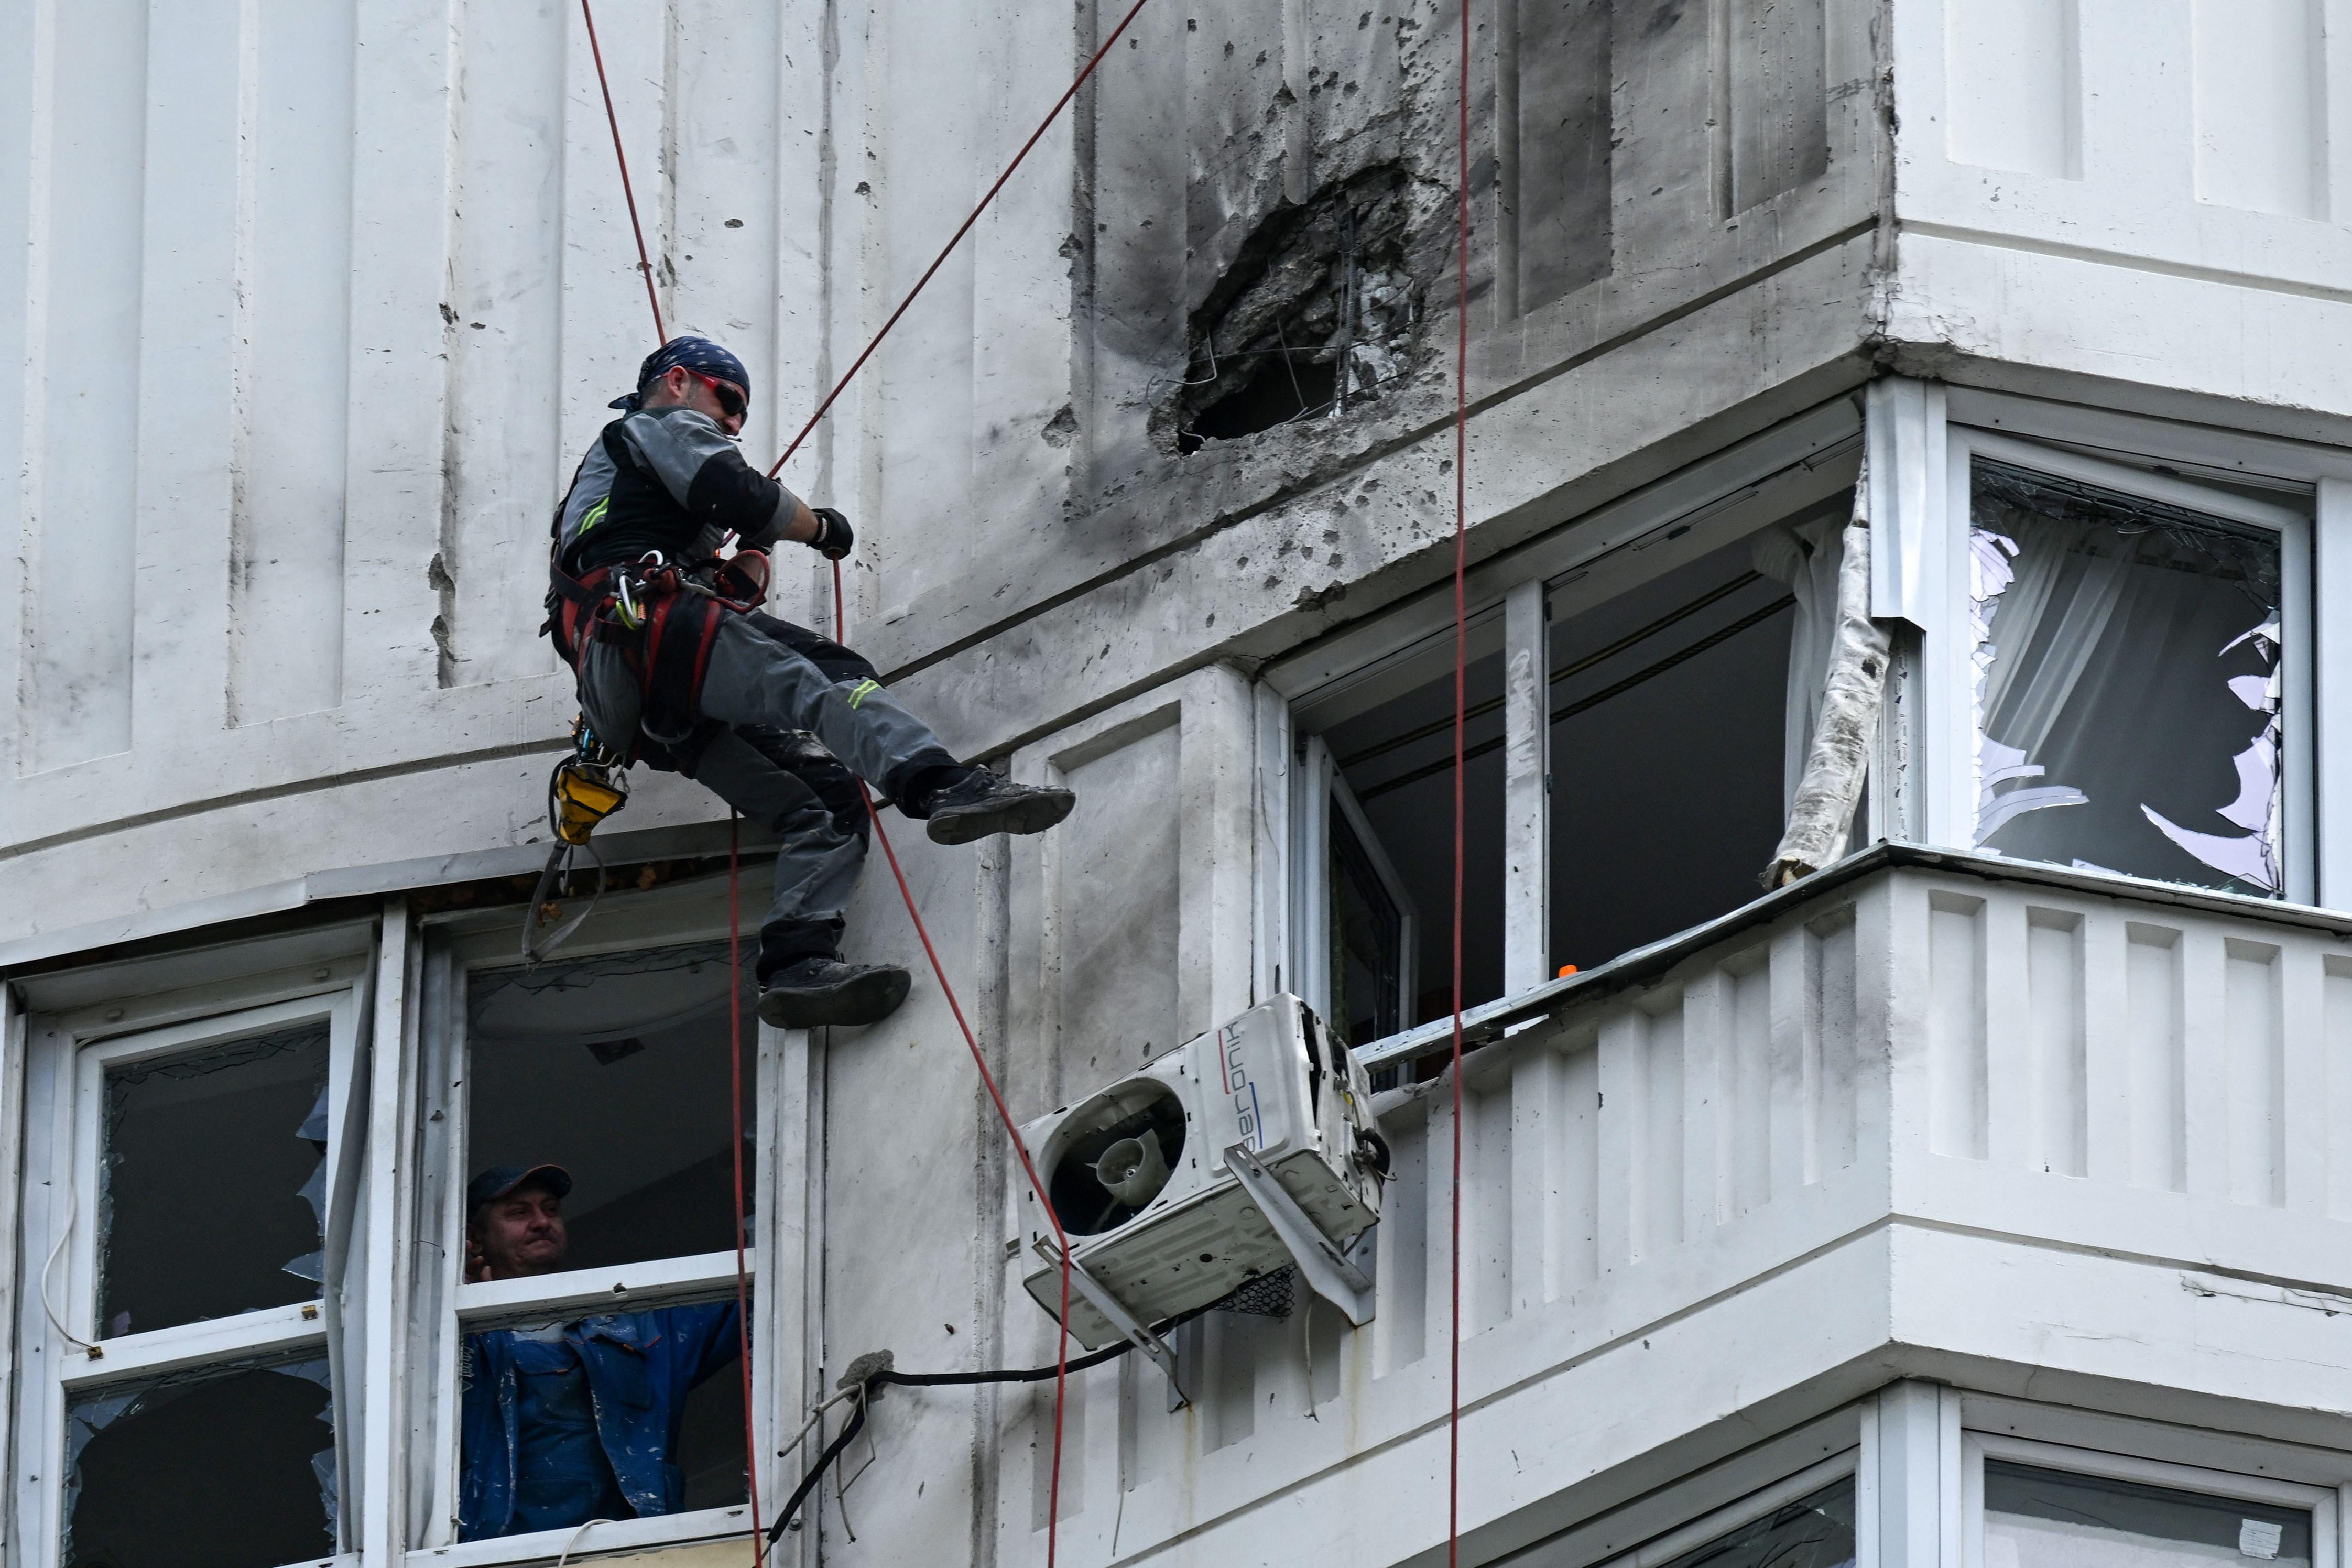 A person harnessed to the side of an apartment building inspects a hole blasted into its side. Broken windows are visible below.